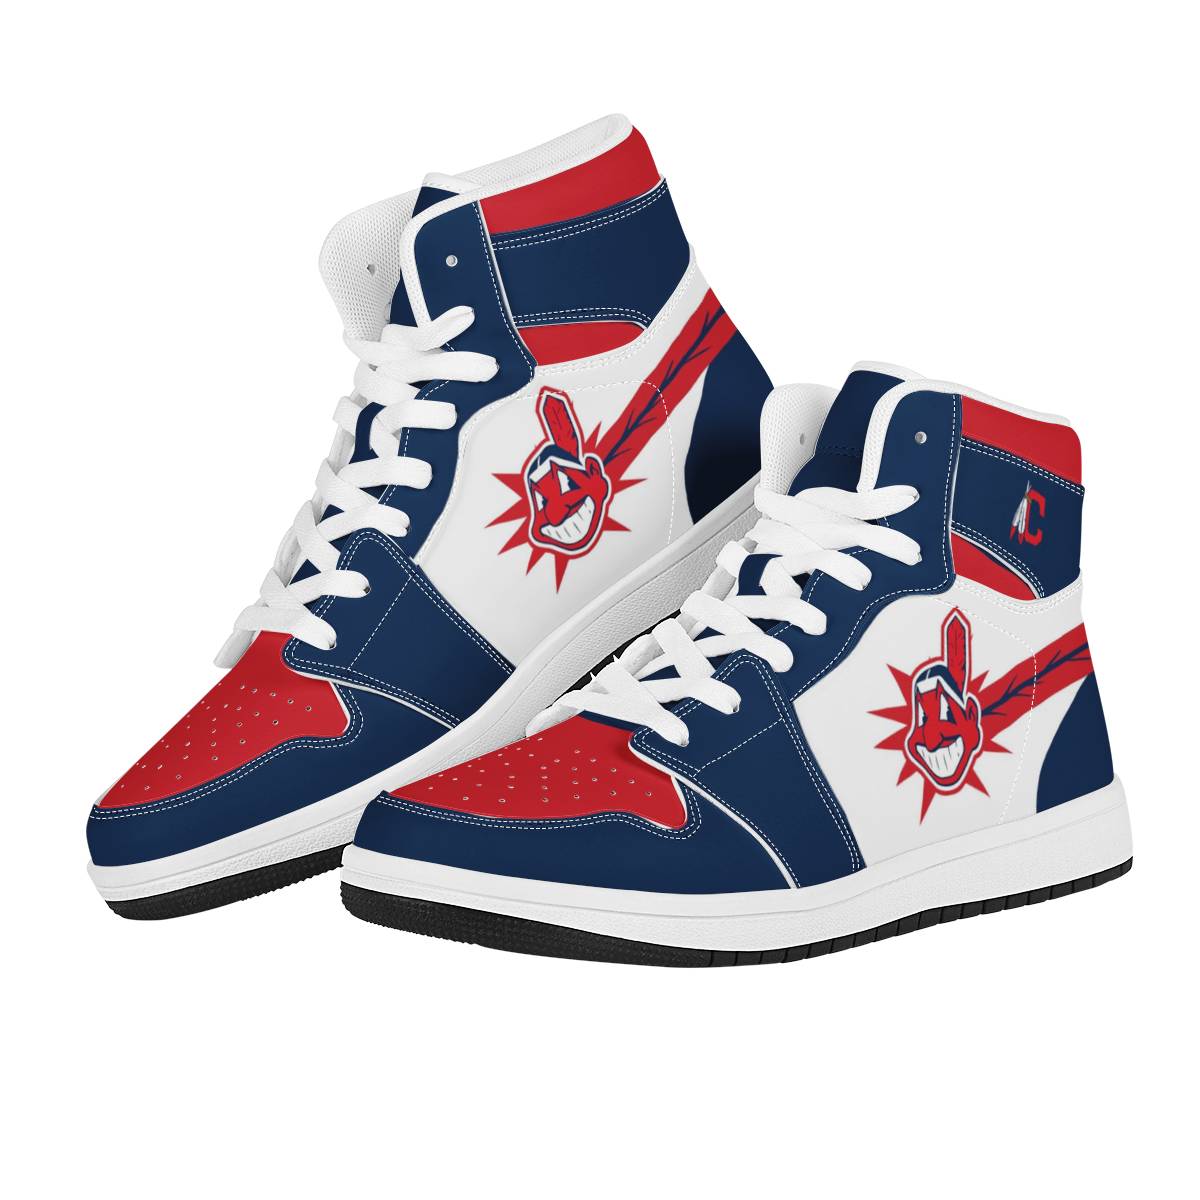 Women's Cleveland Indians High Top Leather AJ1 Sneakers 002